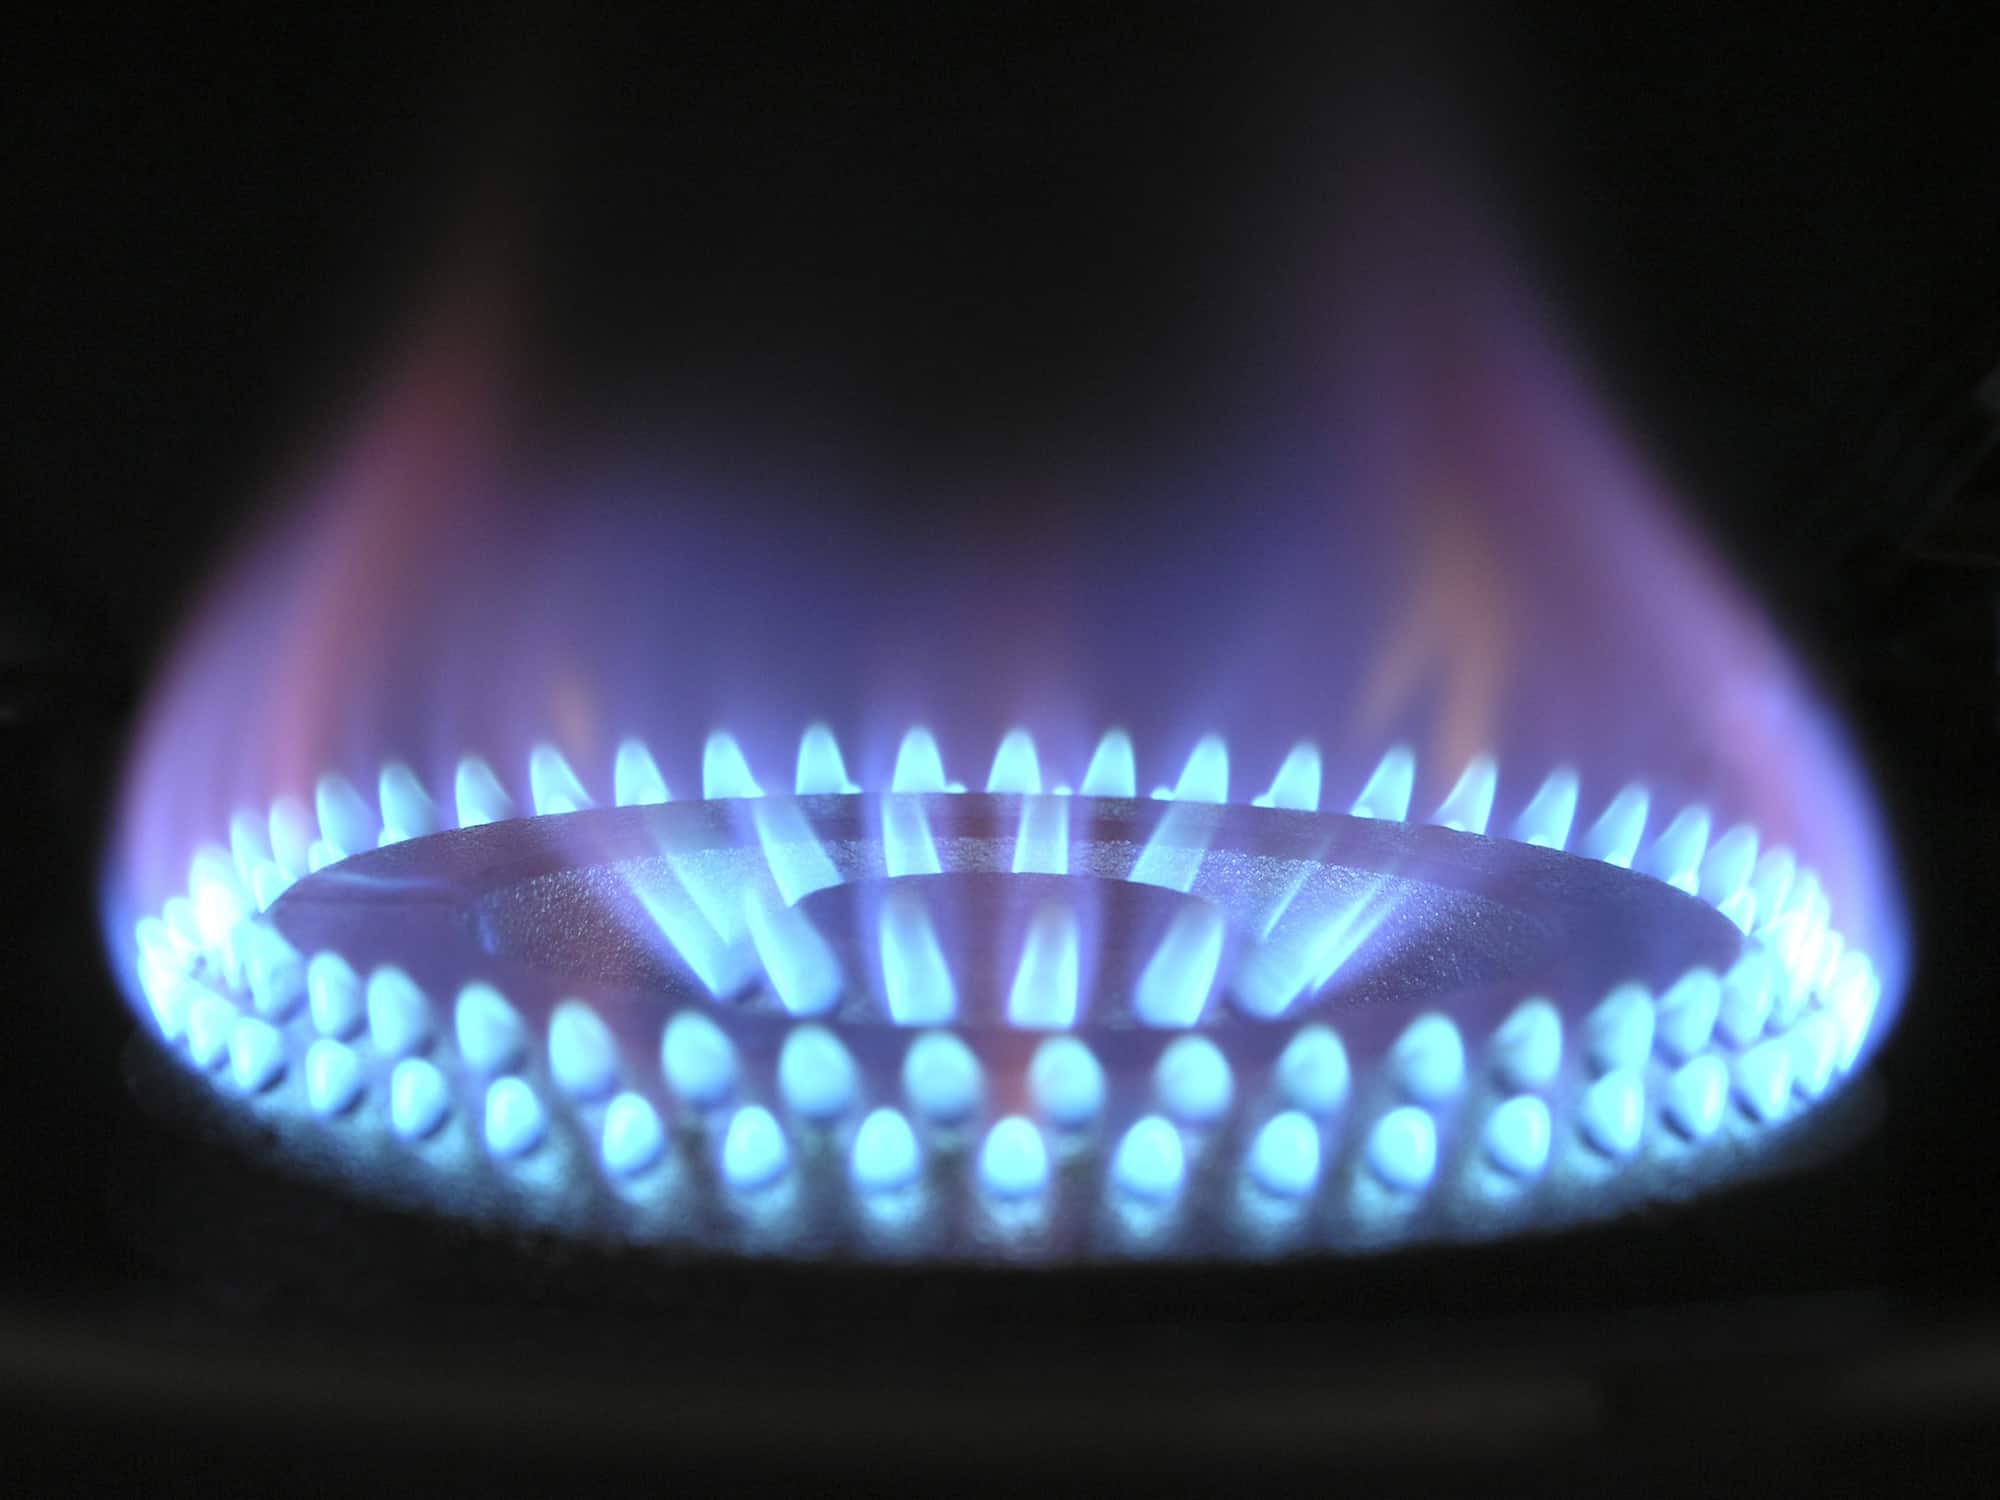 Gas stove blue flame